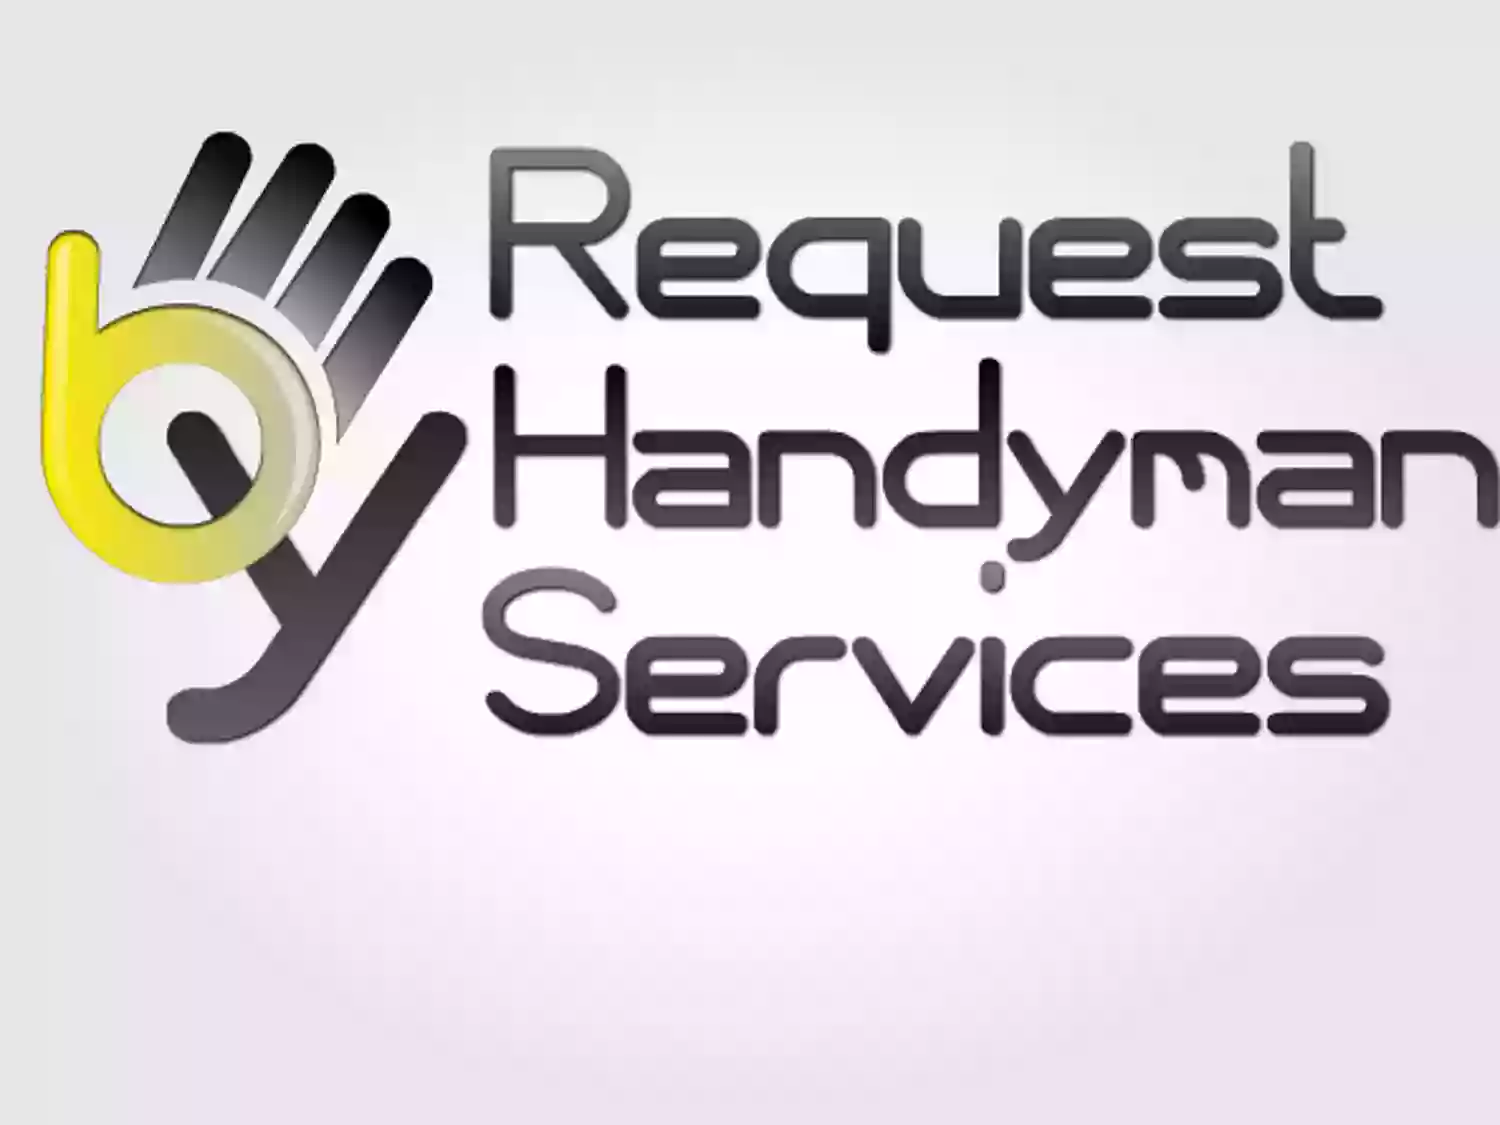 By Request Handyman Services